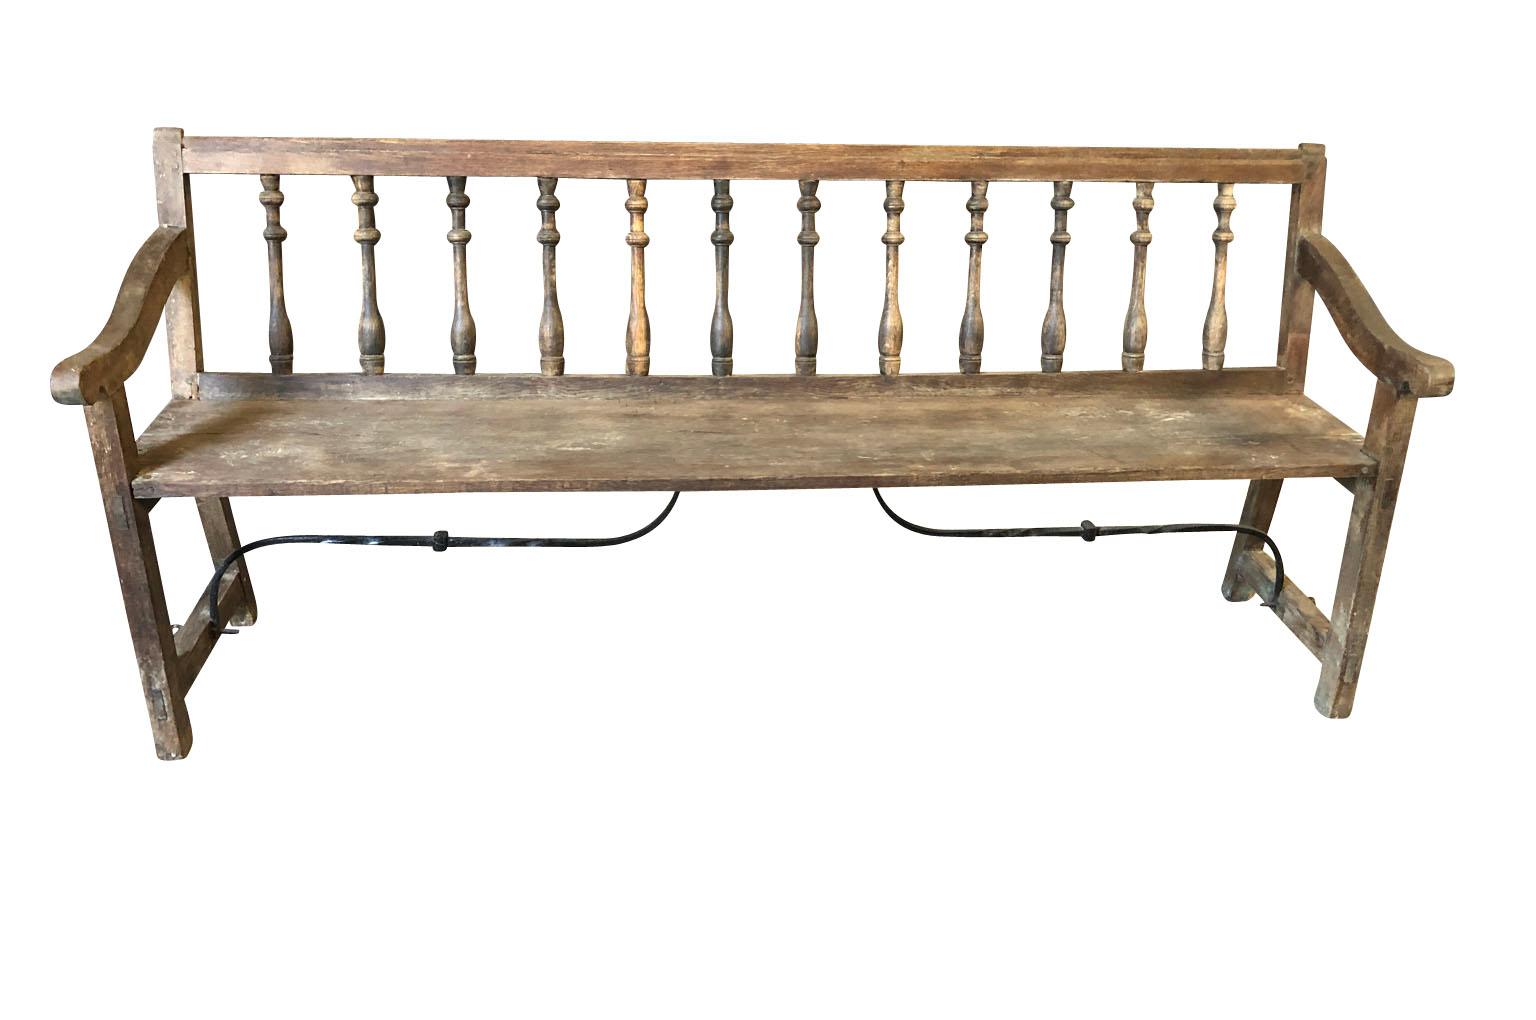 A very charming mid-19th century bench from the Catalan region of Spain. Soundly constructed from beautiful naturally washed chestnut and hand forged iron stretchers. Perfect for any casual interior of porch. Measures: Seat height 19 3/8